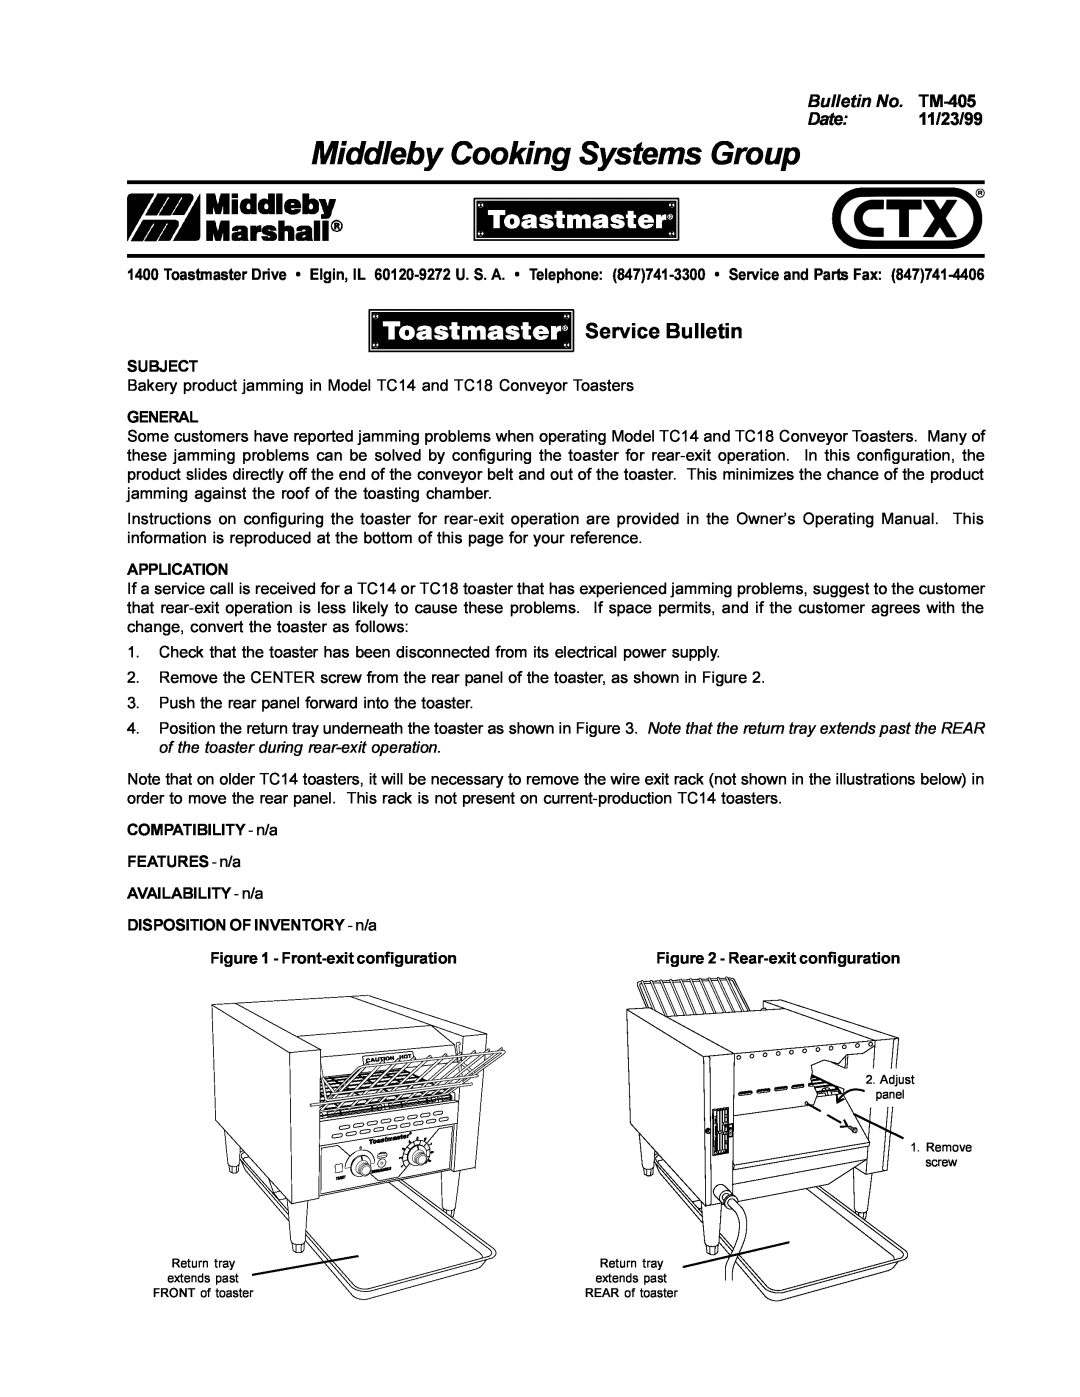 Middleby Marshall TC18, TC14 manual Middleby Cooking Systems Group, Service Bulletin, Bulletin No. TM-405, Date 11/23/99 